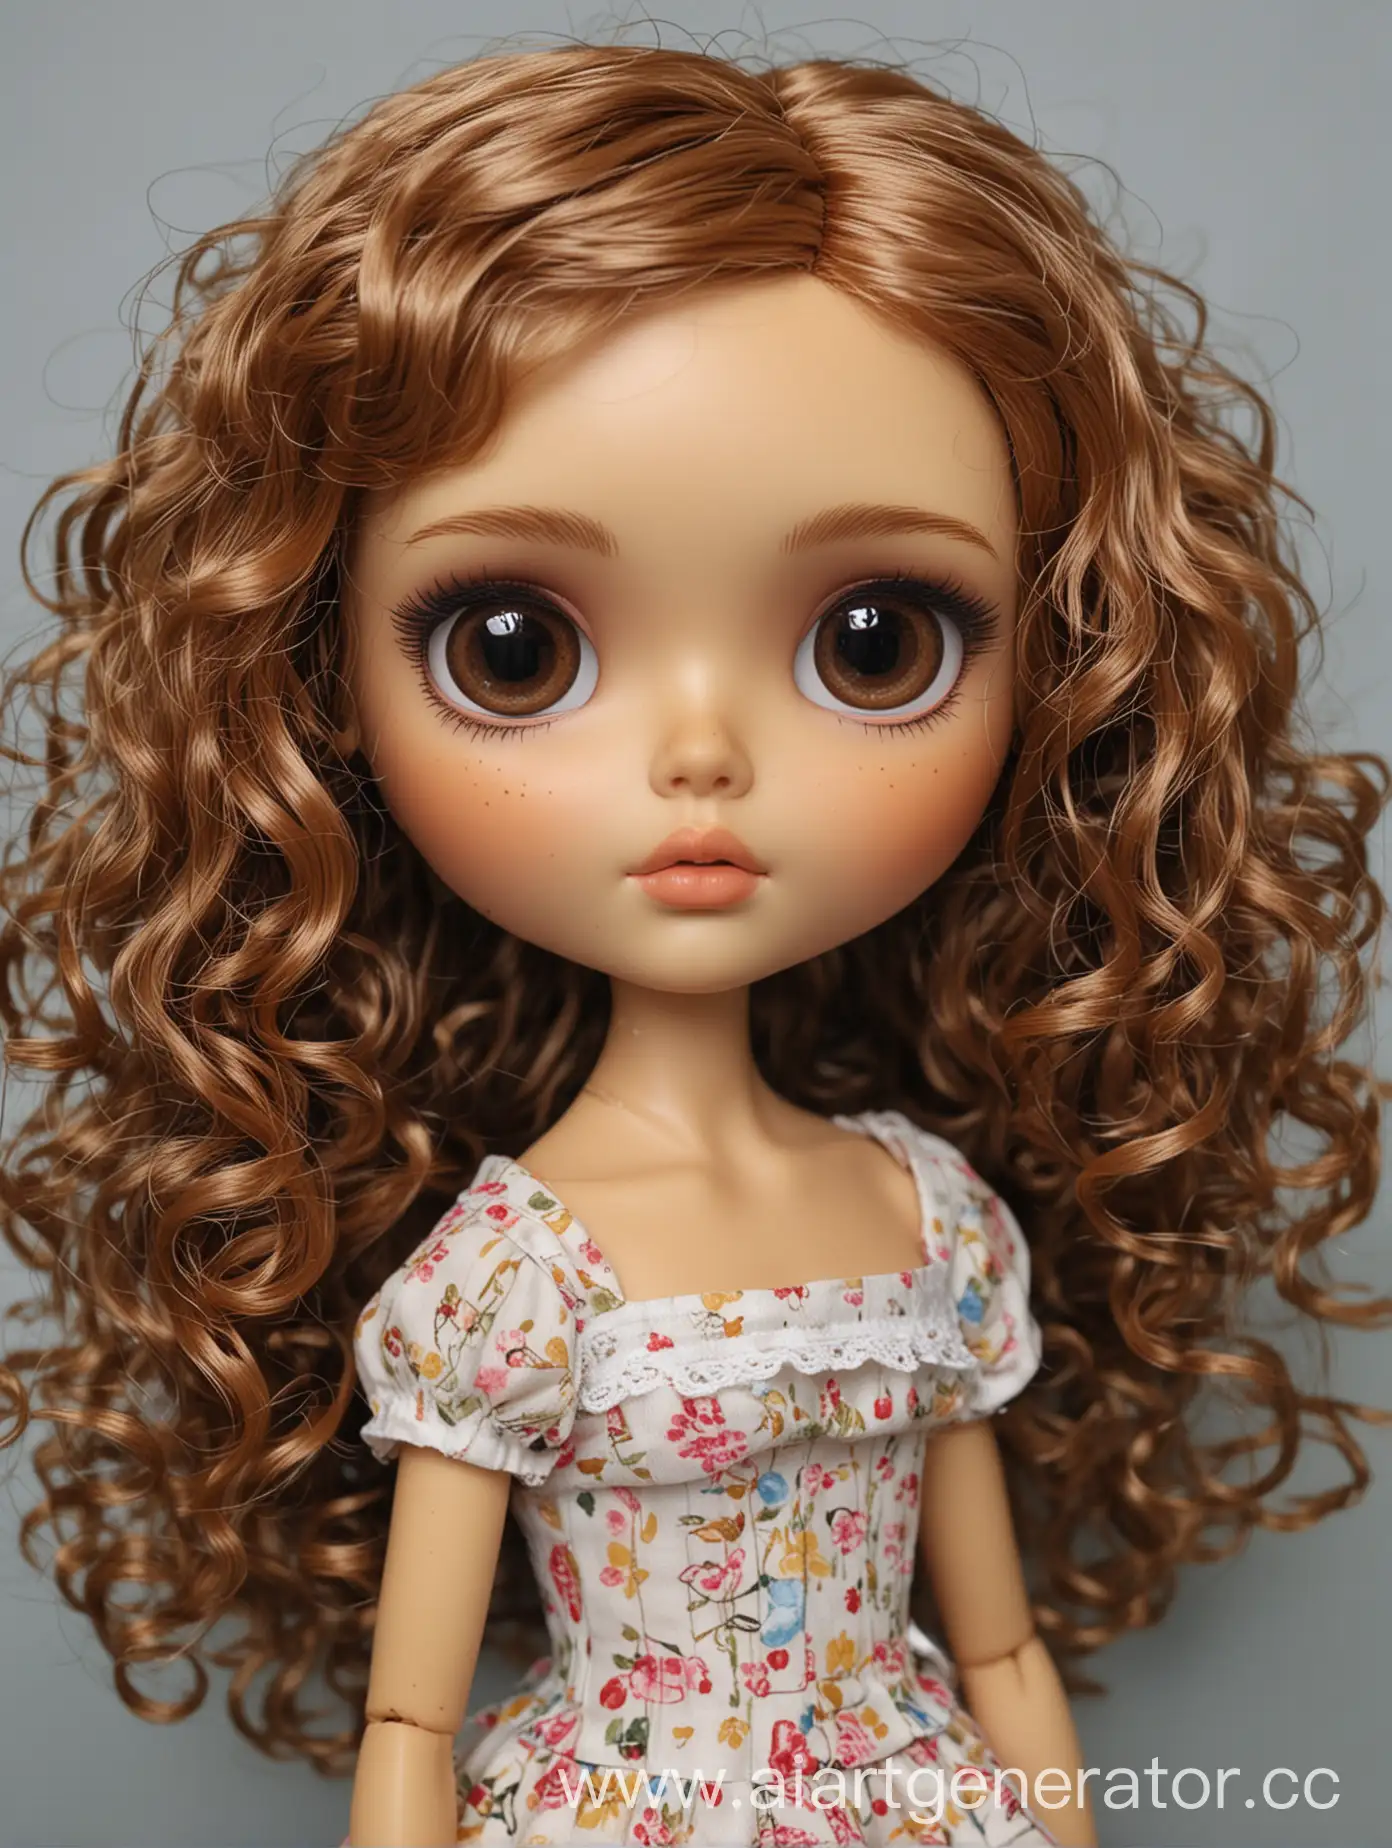 Blythe Doll with medium curly hair and brown eyes